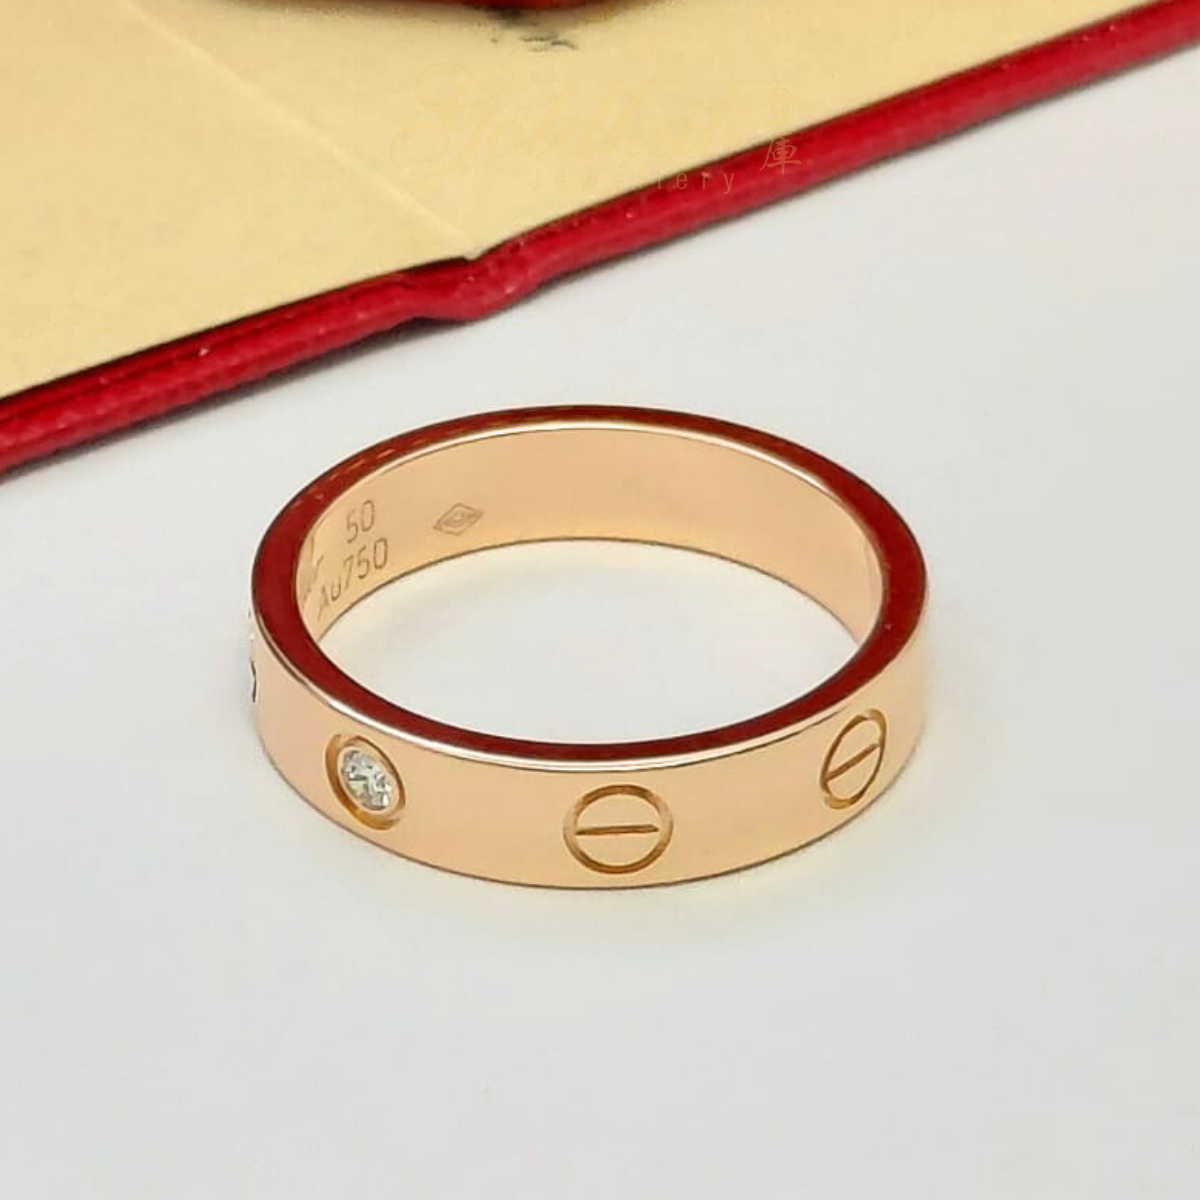 18k Pre-loved Cartier Love Wedding Band, 1 Diamond Ring in Rose Gold